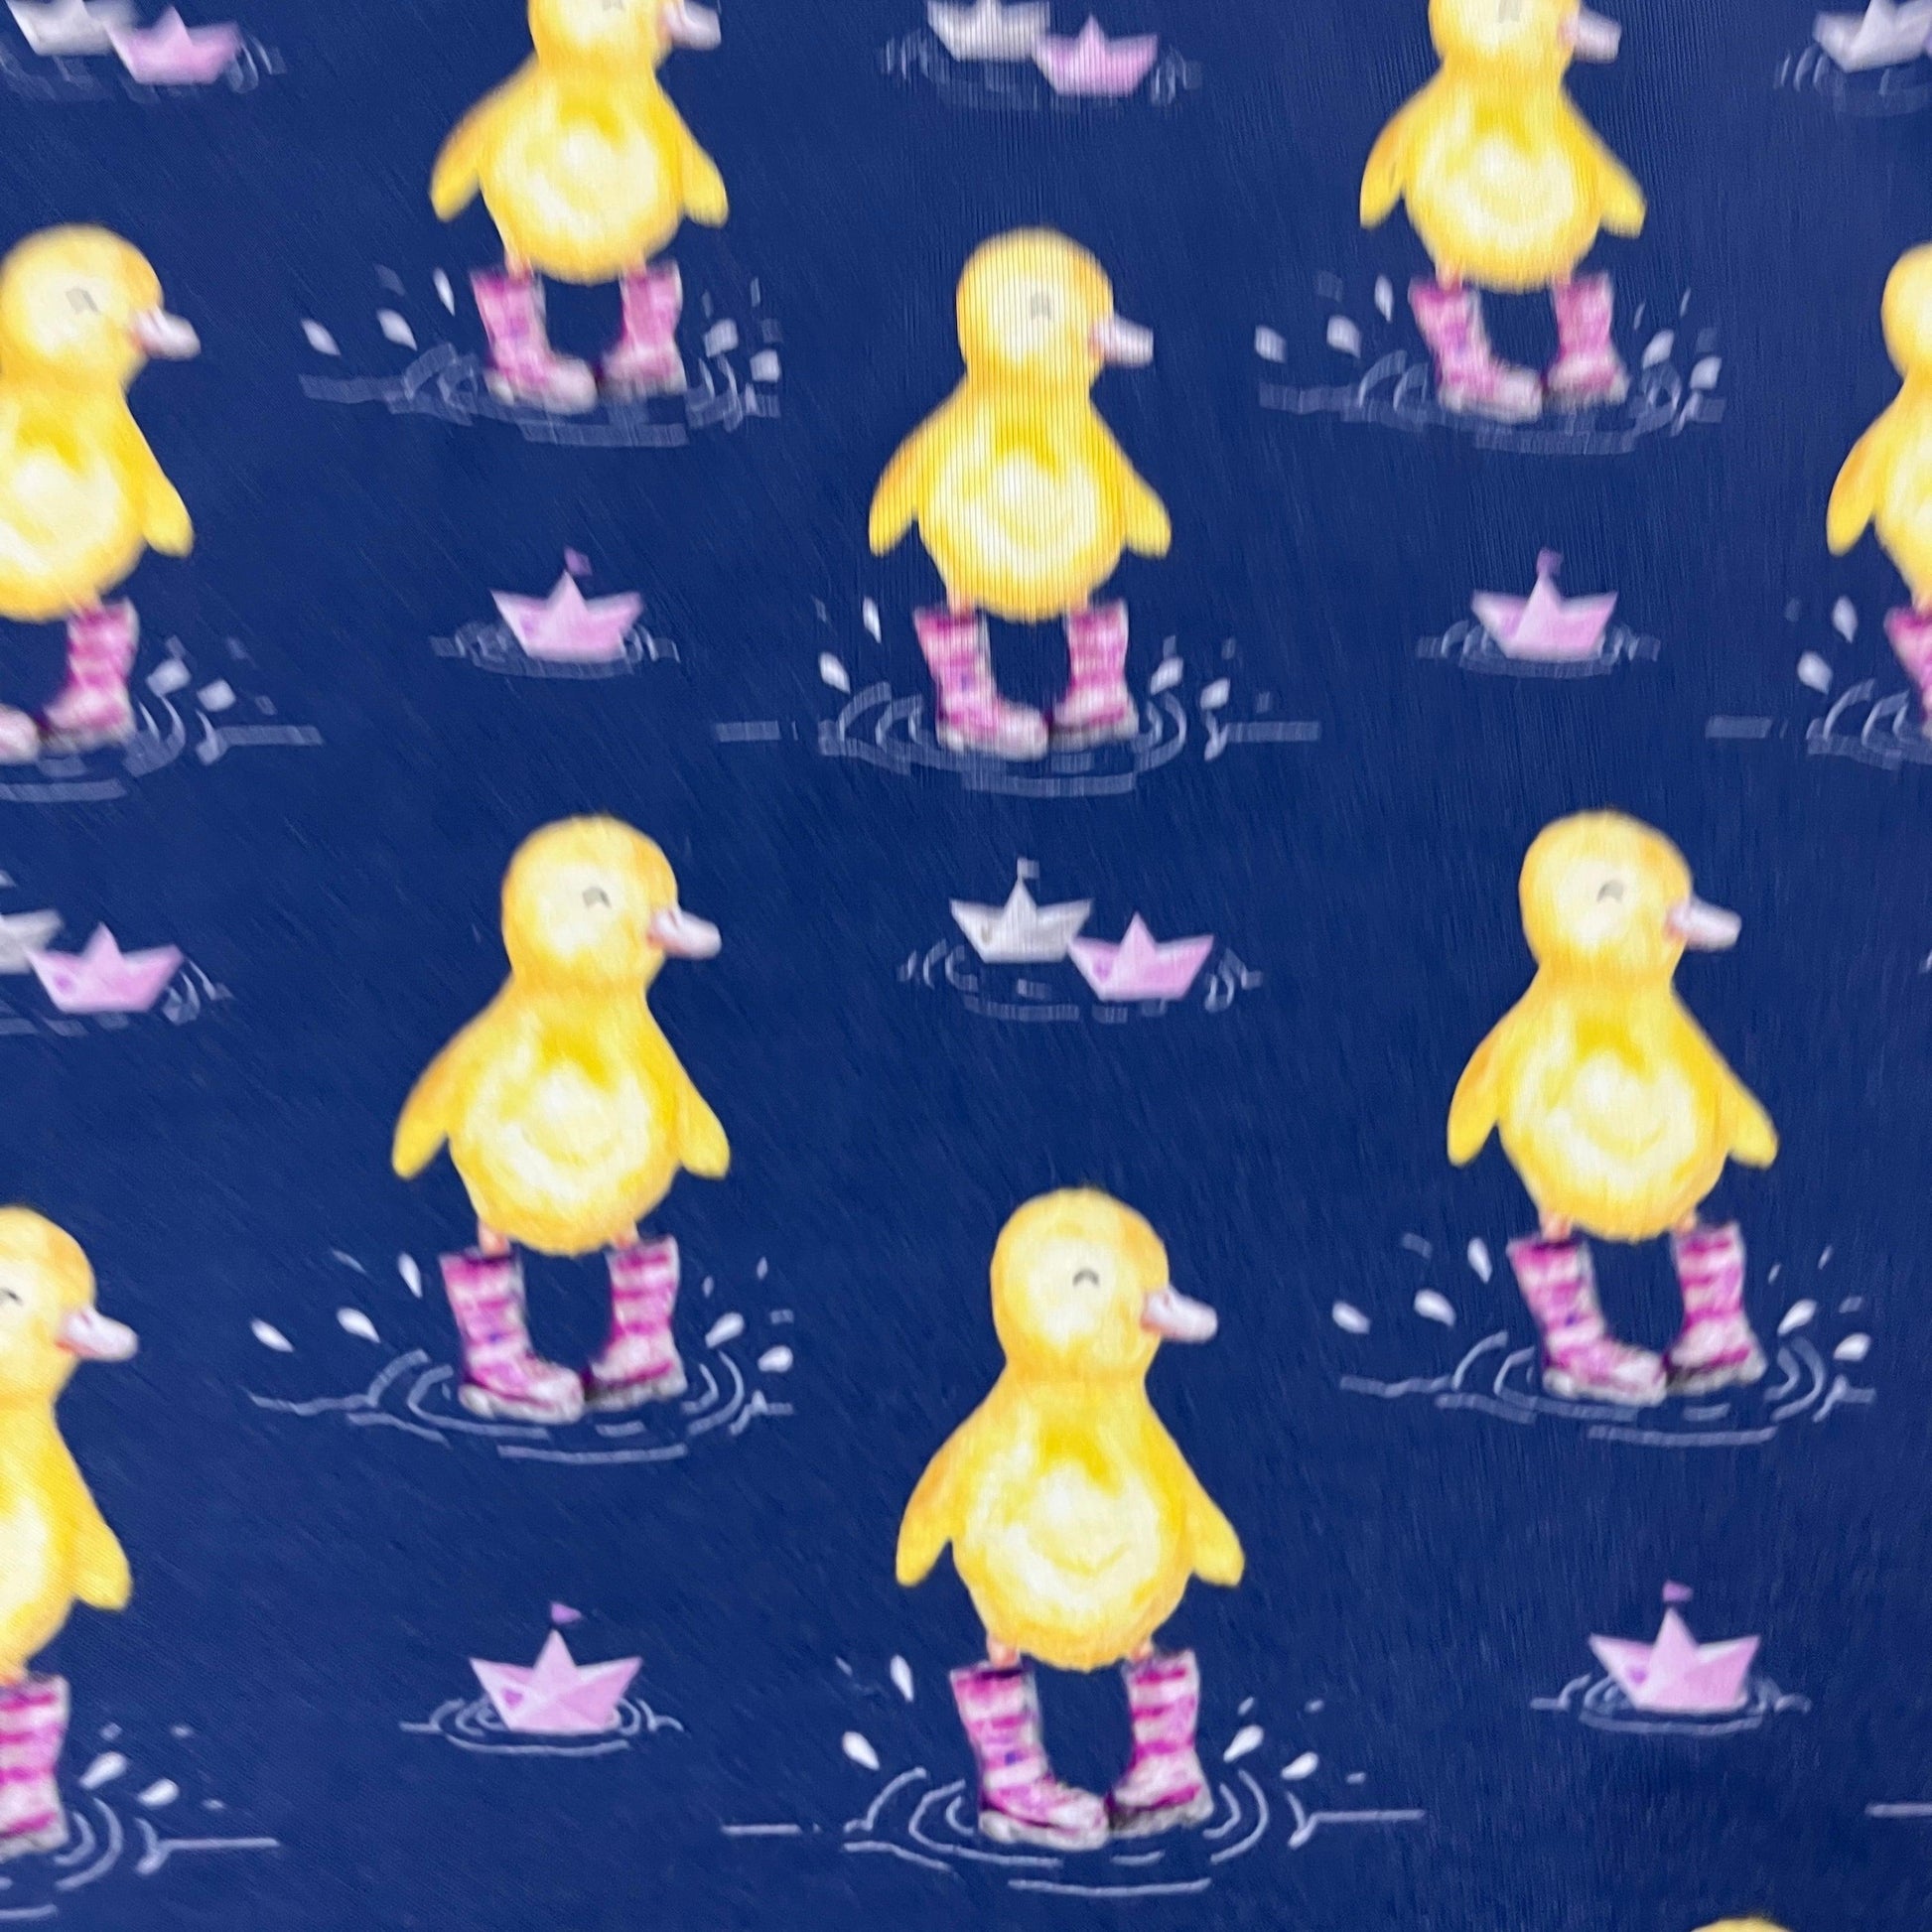 Ducks in Pink Wellies on Bamboo/Spandex Jersey Fabric - Nature's Fabrics